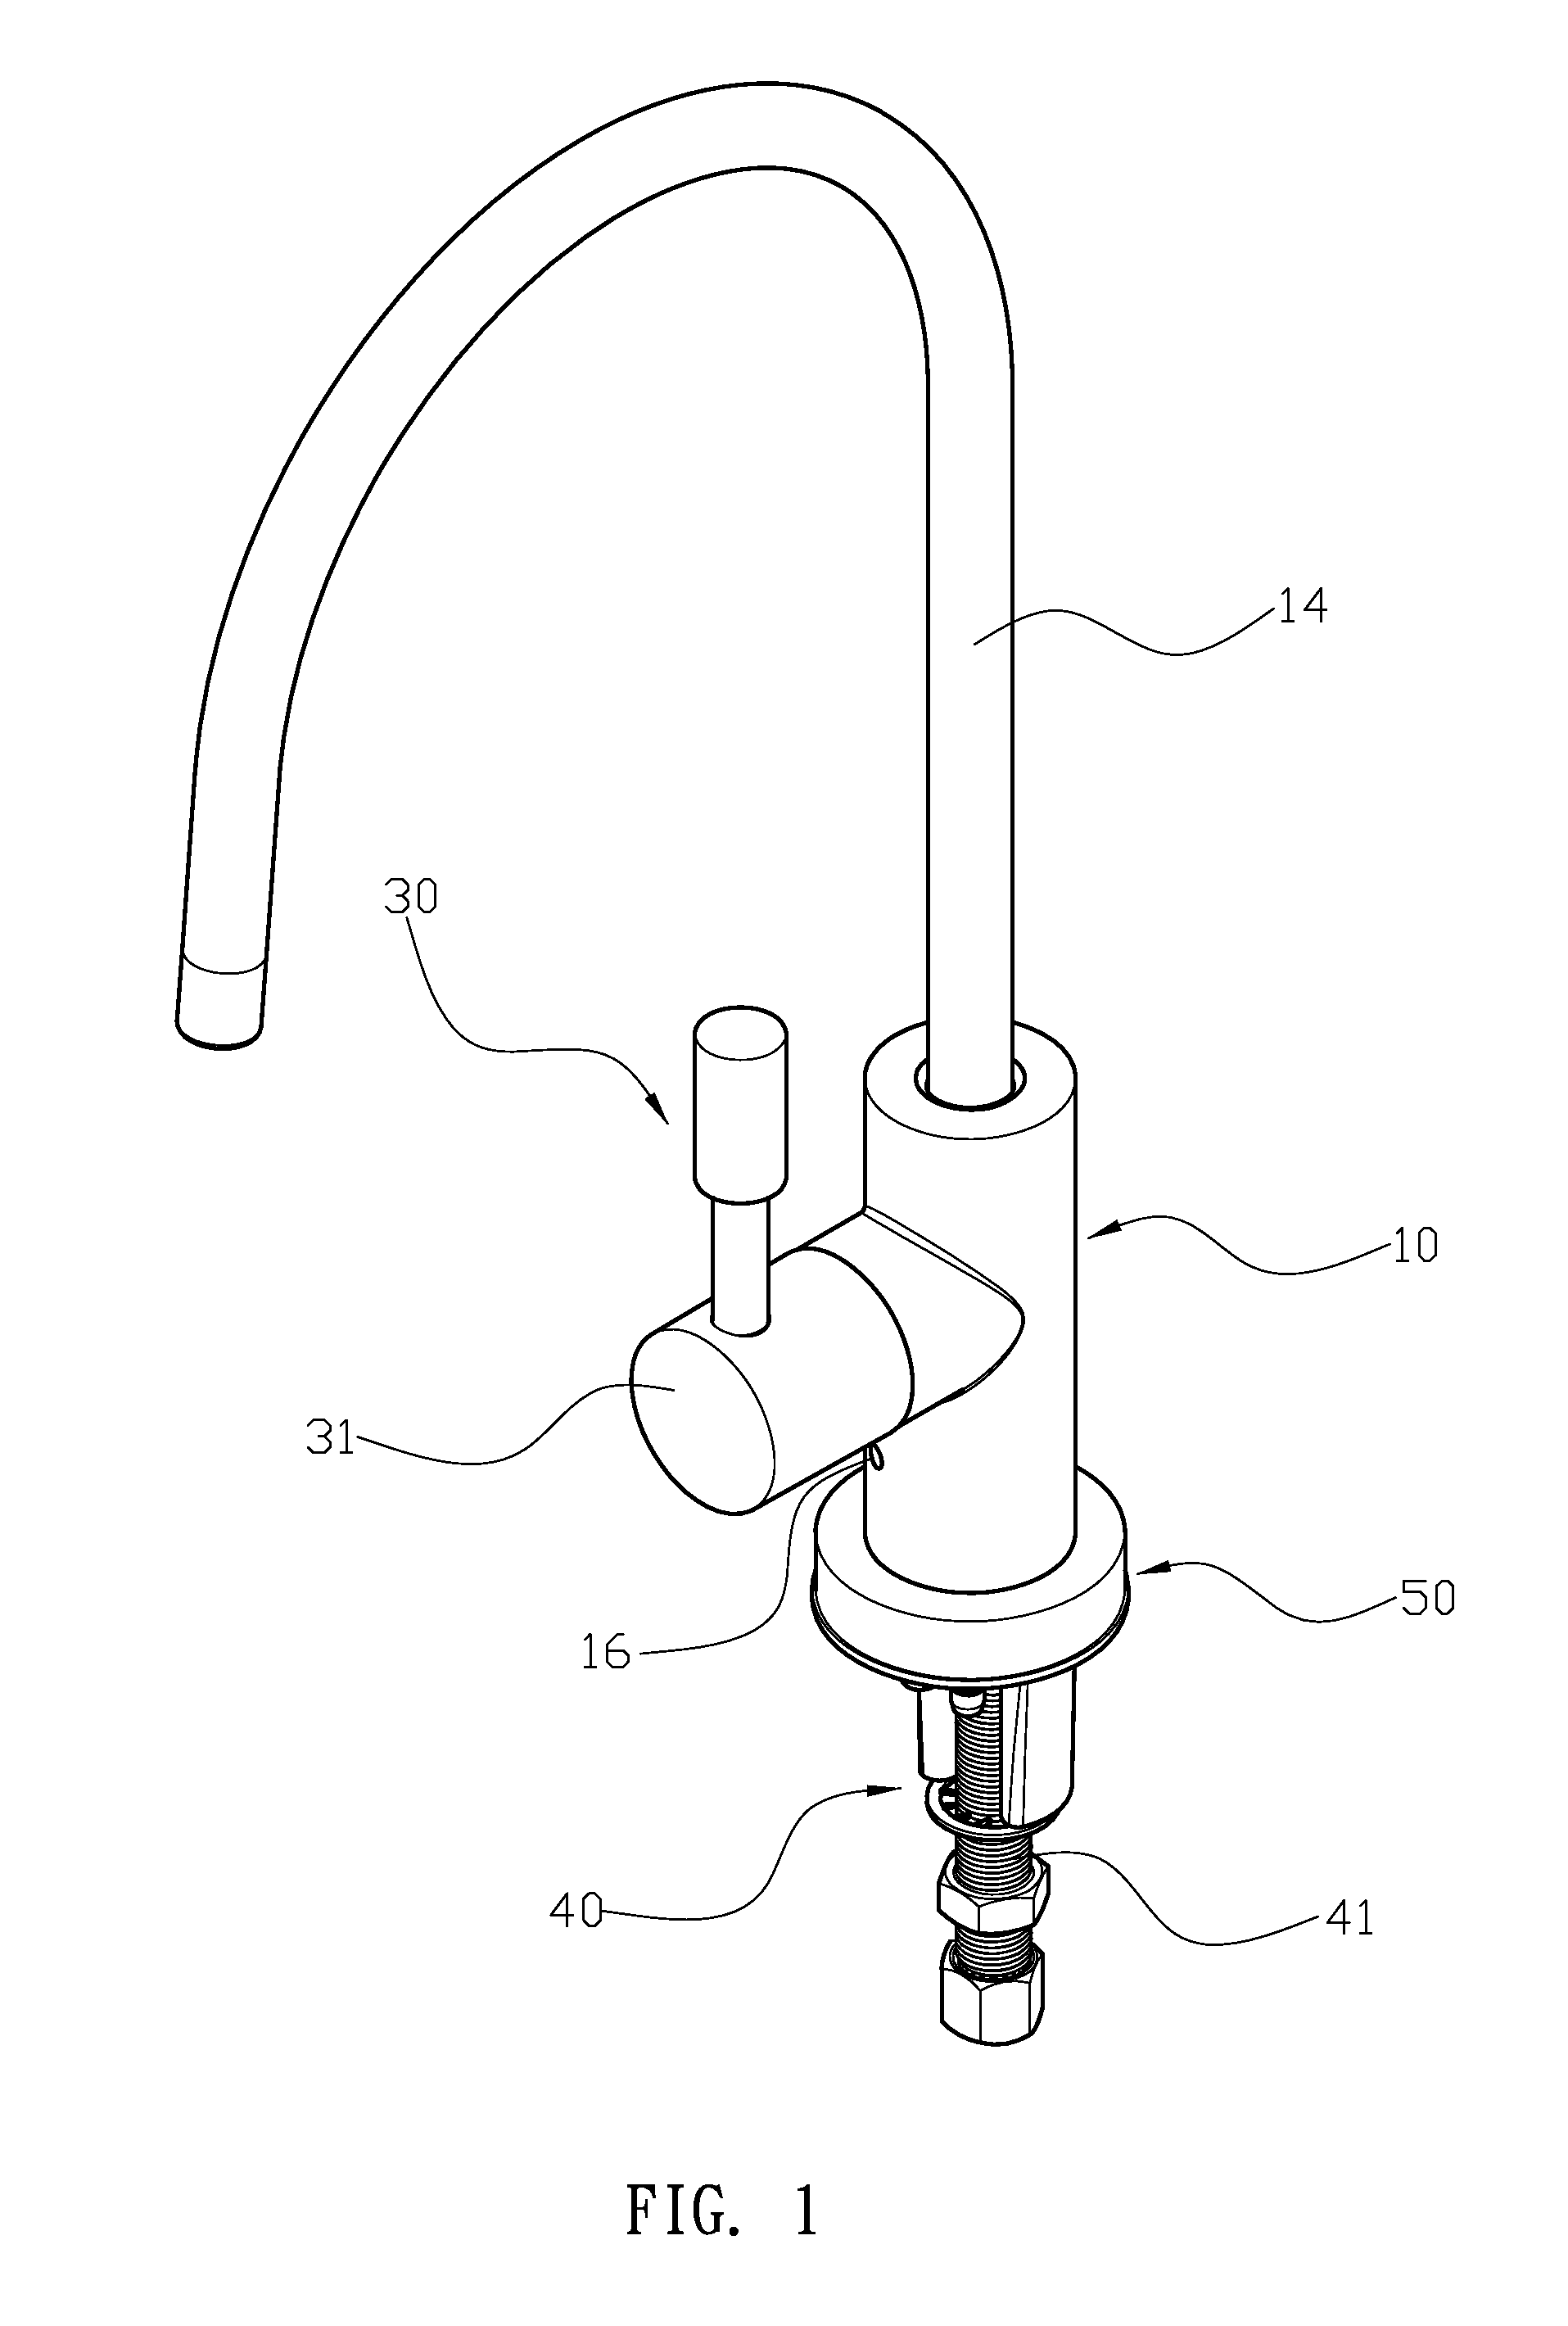 Drinking water faucet with air gap to discharge waste water